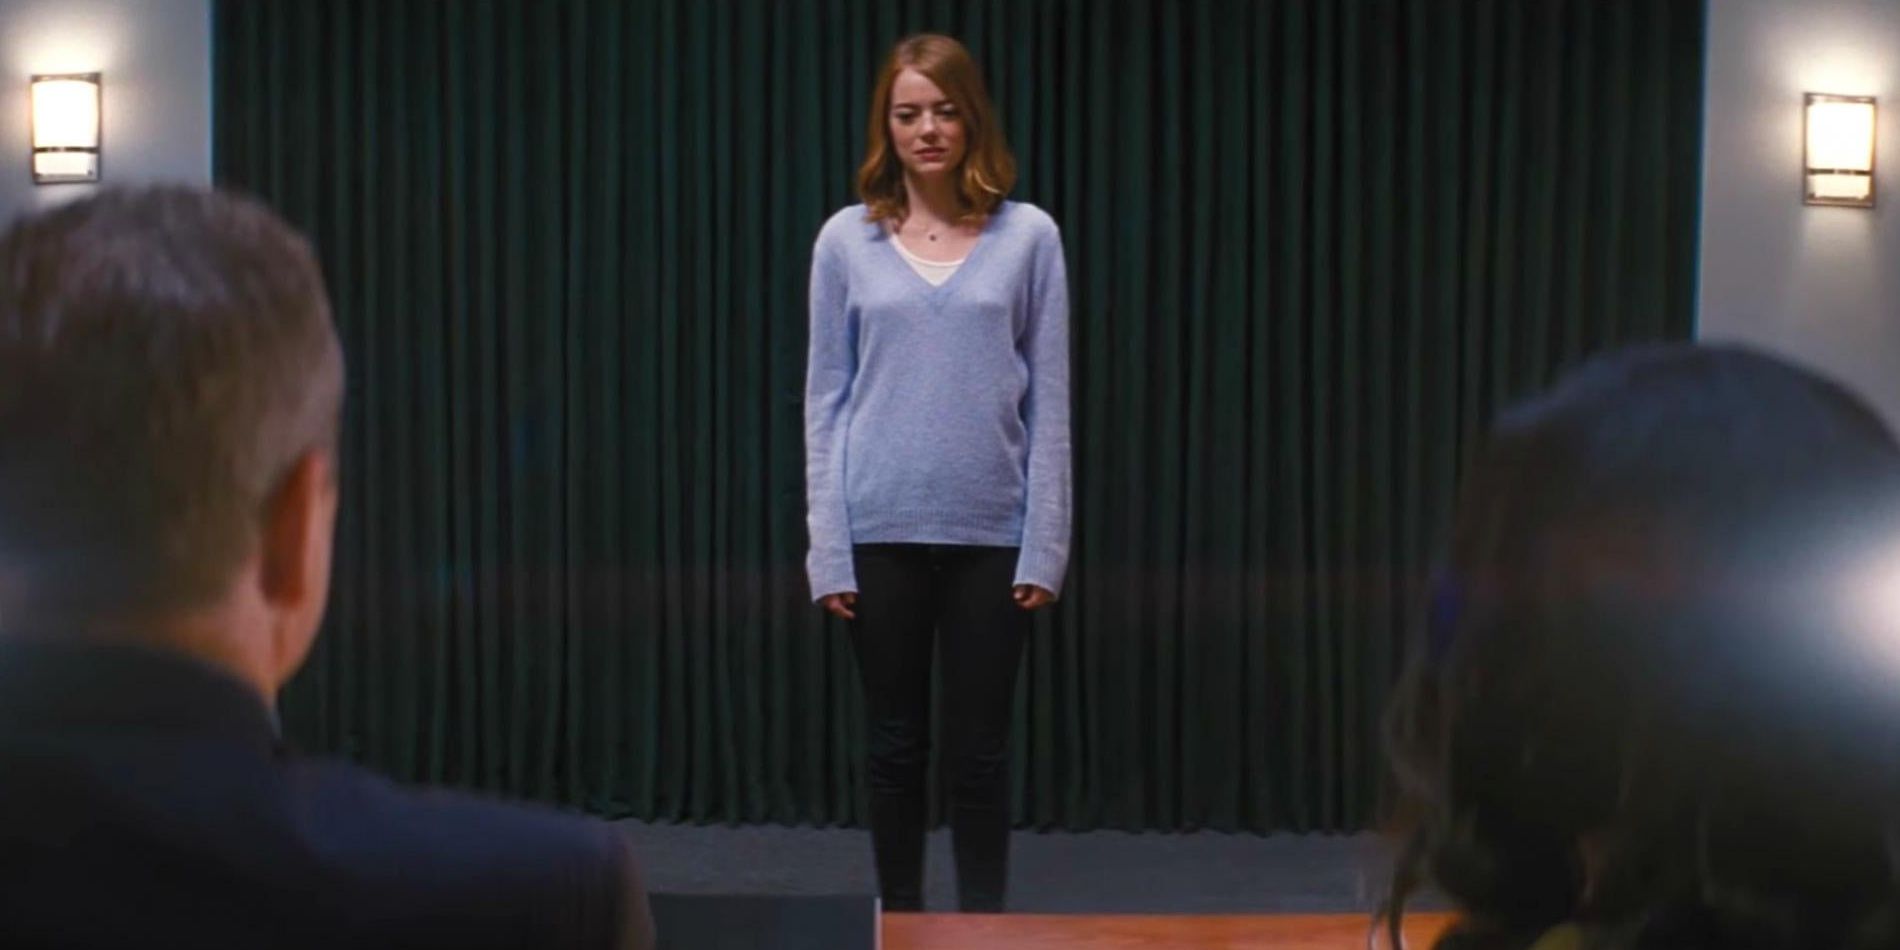 Emma Stone as Mia standing on stage at an audition in La La Land